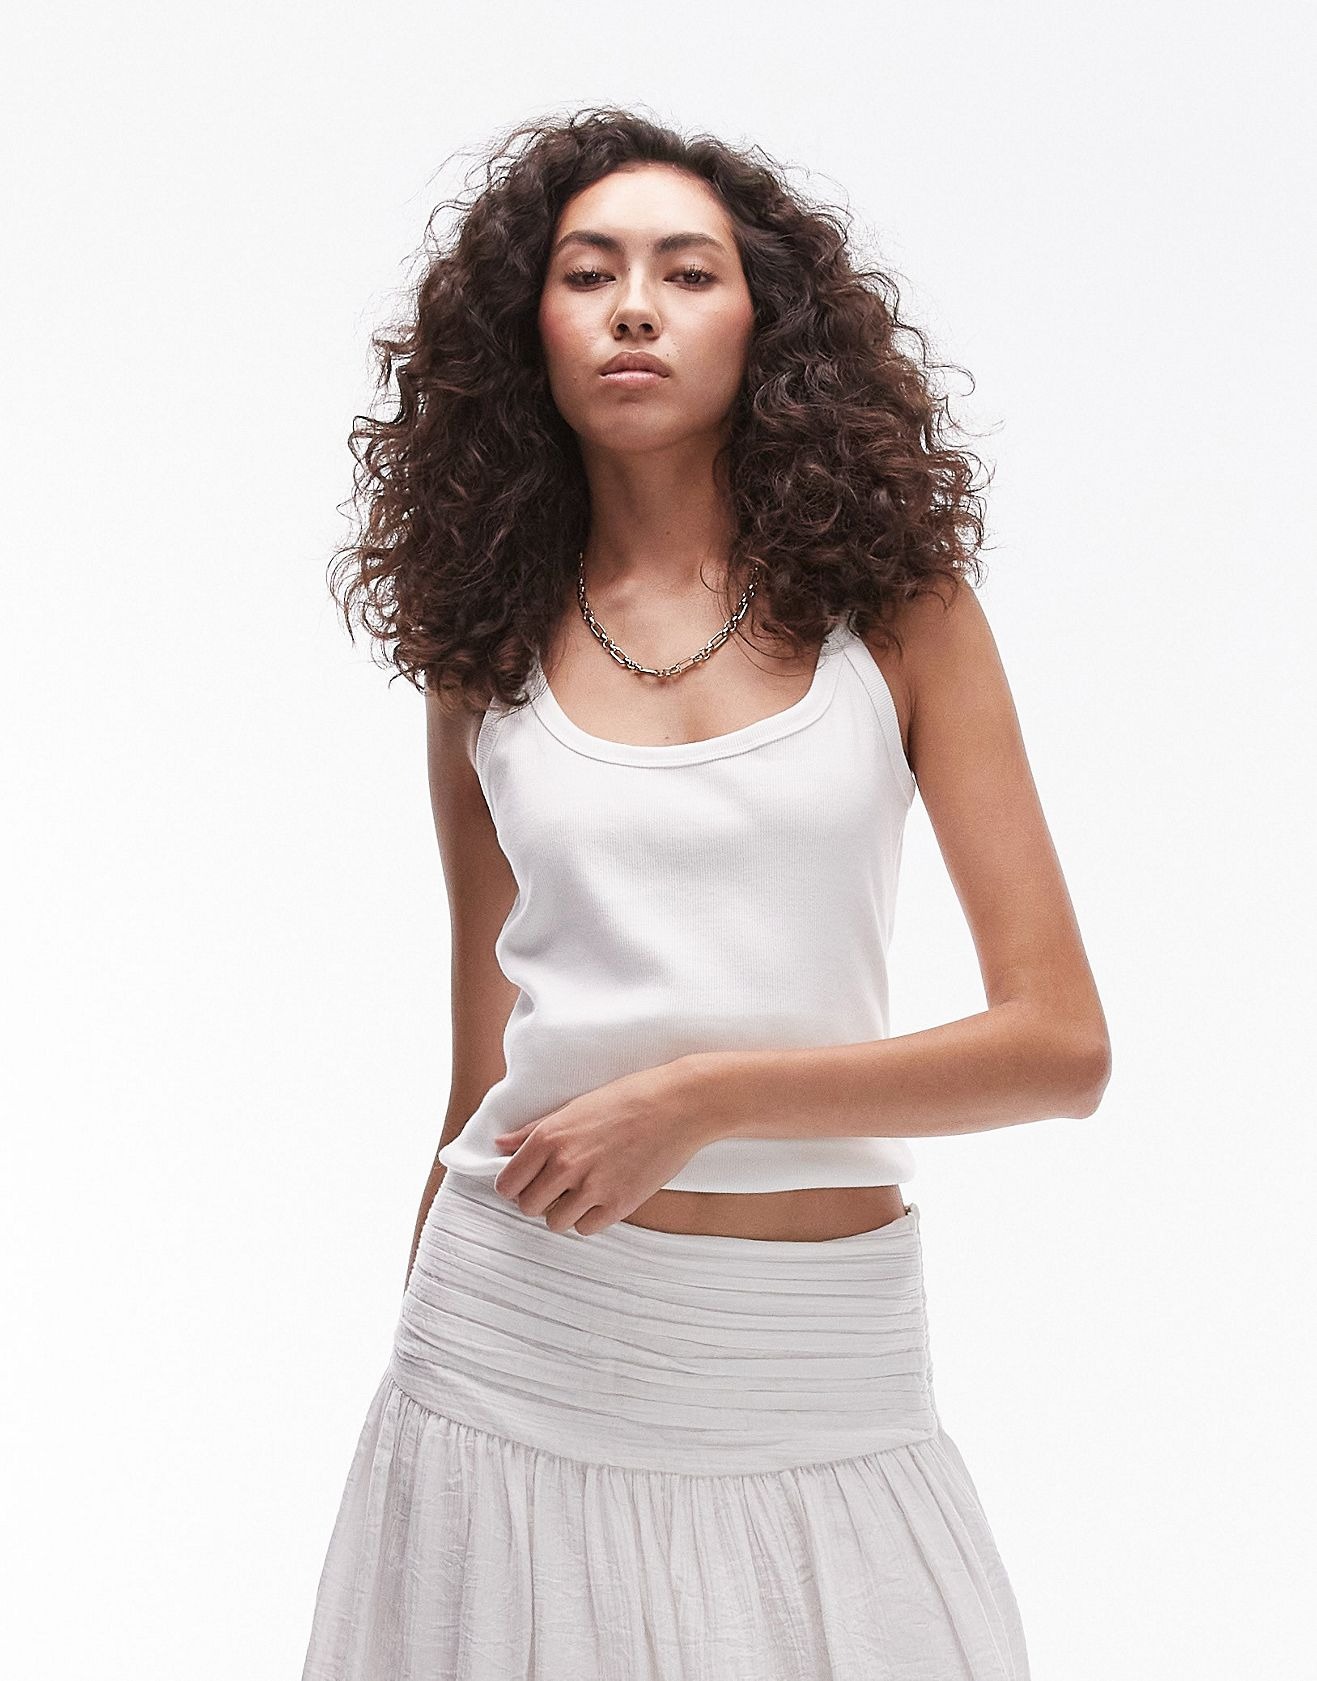 Топ Topshop Ribbed Thin-strapped With Boat Neckline, белый топ topshop petite ribbed thin strapped with u shaped neckline черный